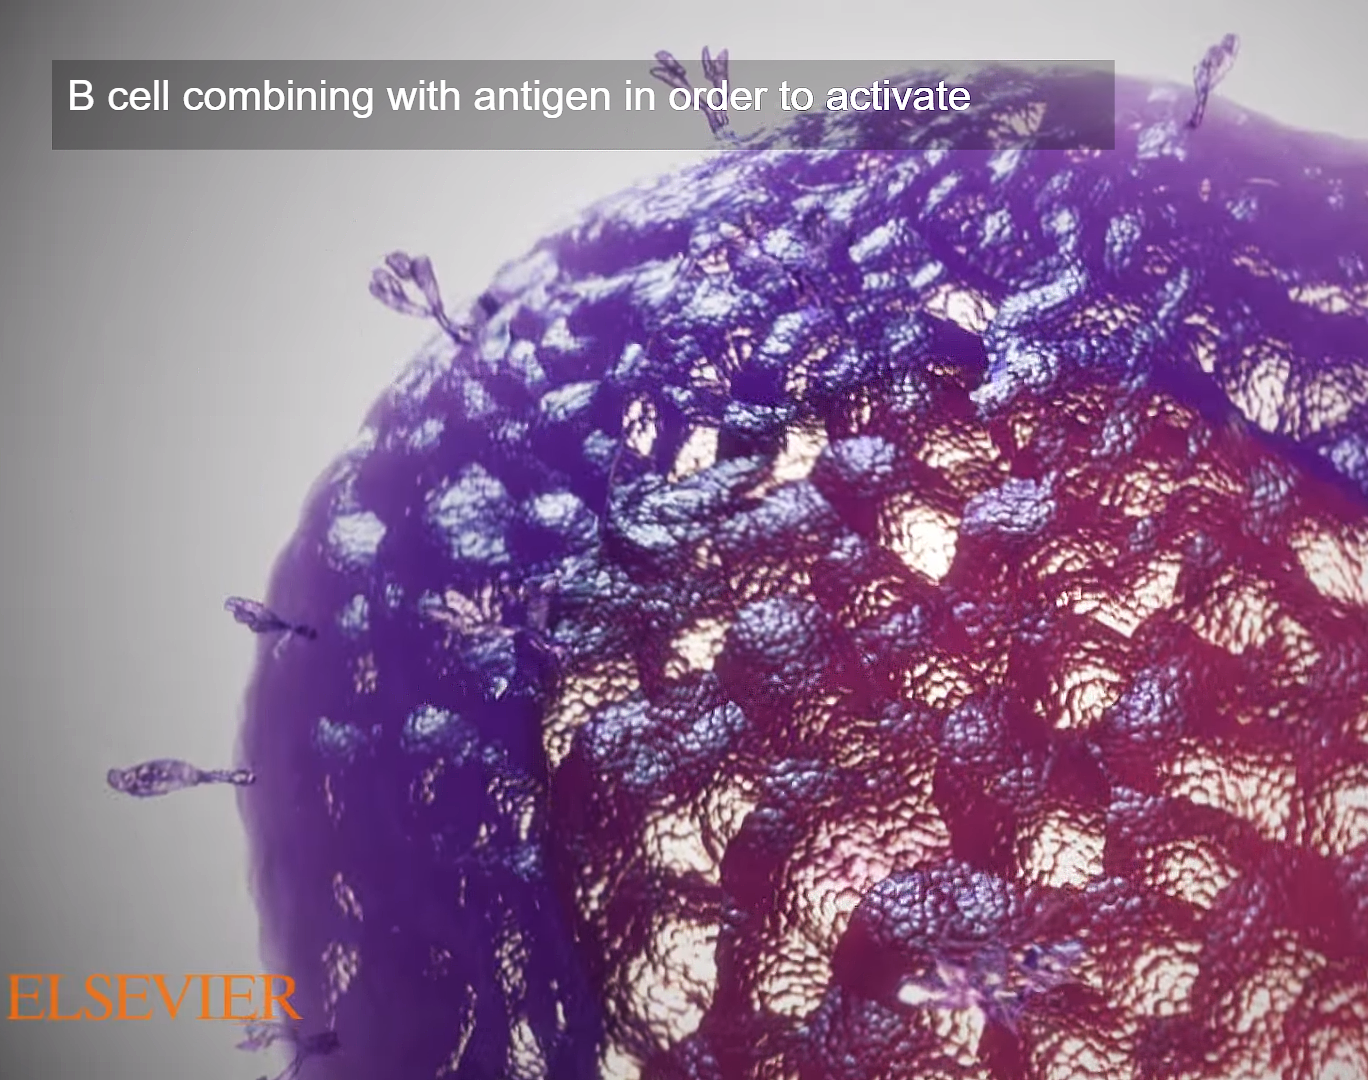 This image is a shot from one of Trinity's medical biological animation portraying a B cell combing with an antigen in order to activate rendered from Trinity Animation's 3D software. The B Cell is displayed in a vibrant purple with hyper realistic textures.